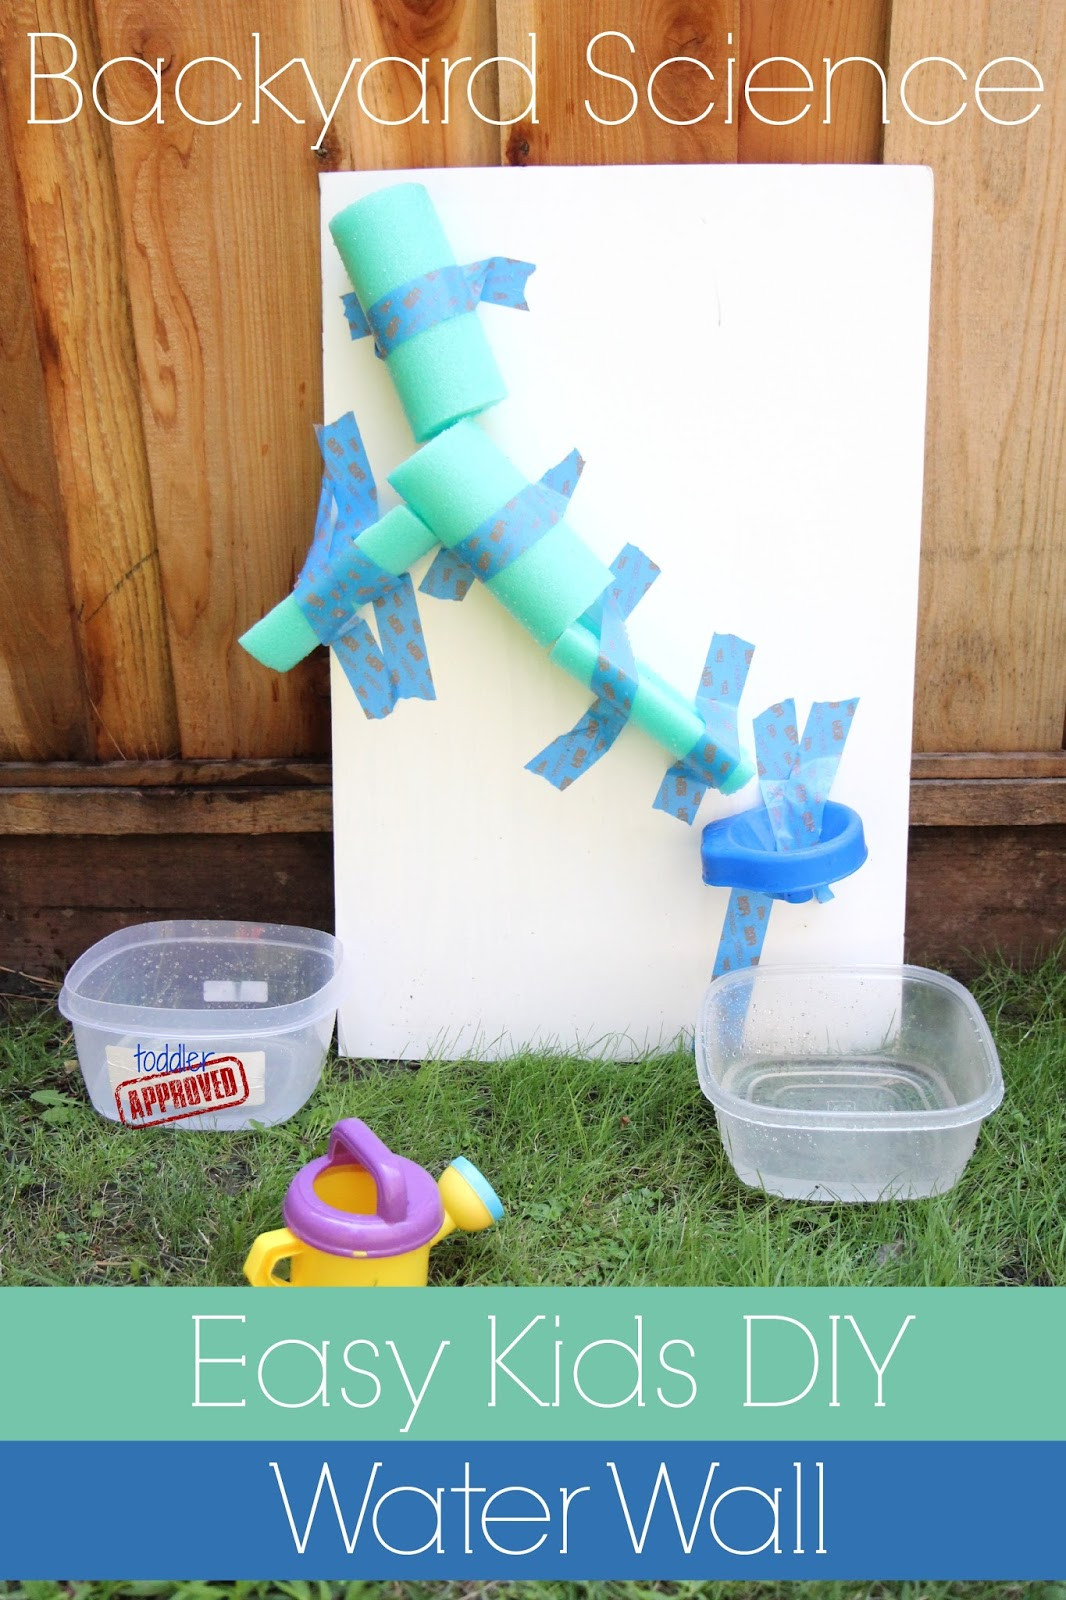 DIY Outdoor Water Wall
 Toddler Approved Easy DIY Water Wall for Kids Backyard